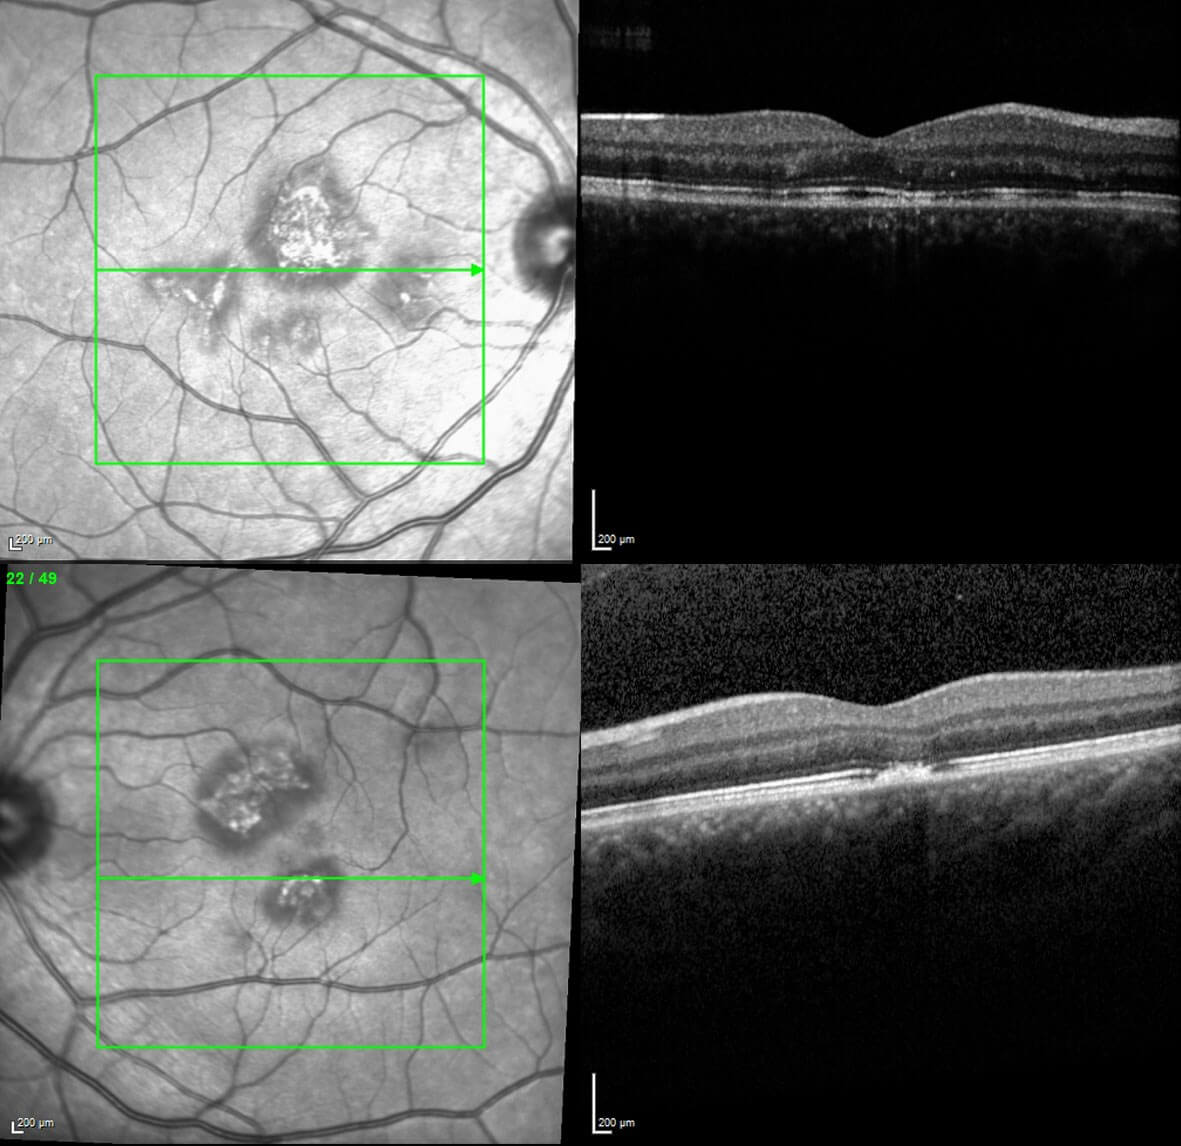 Three months after initial presentation the lesions are less prominent on optical coherence tomography.